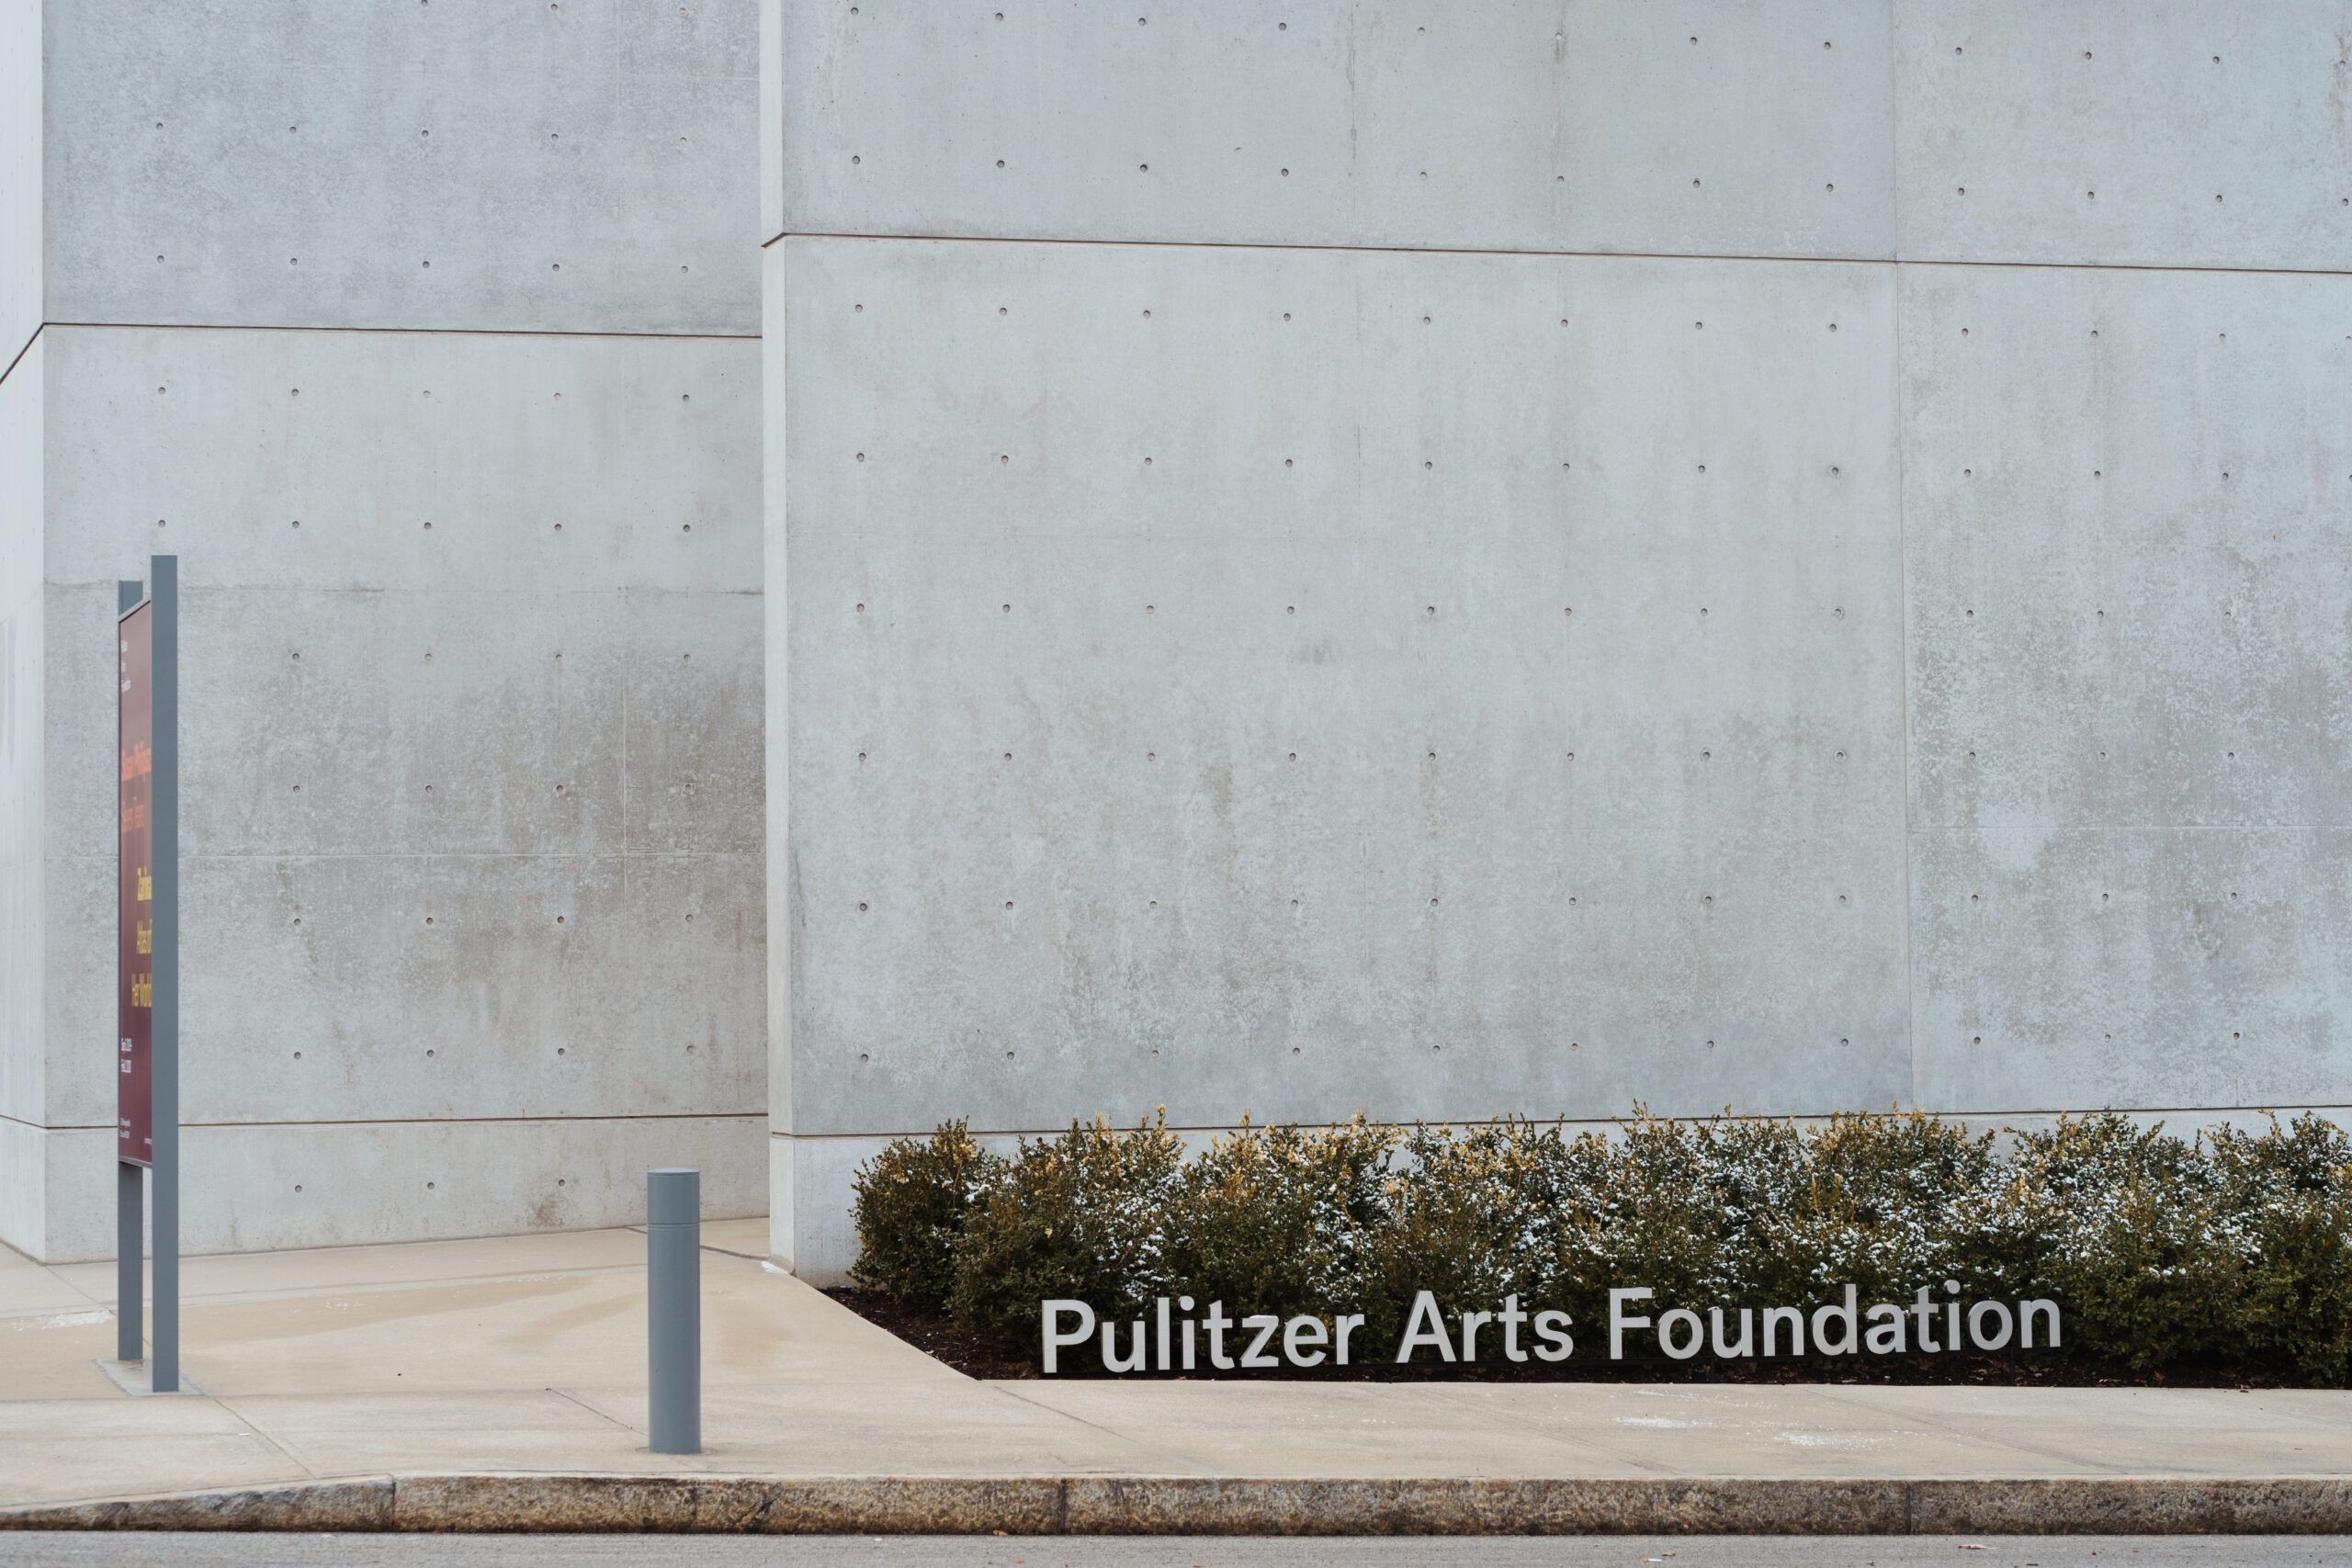 Exterior sign of the Pulitzer Arts Foundation